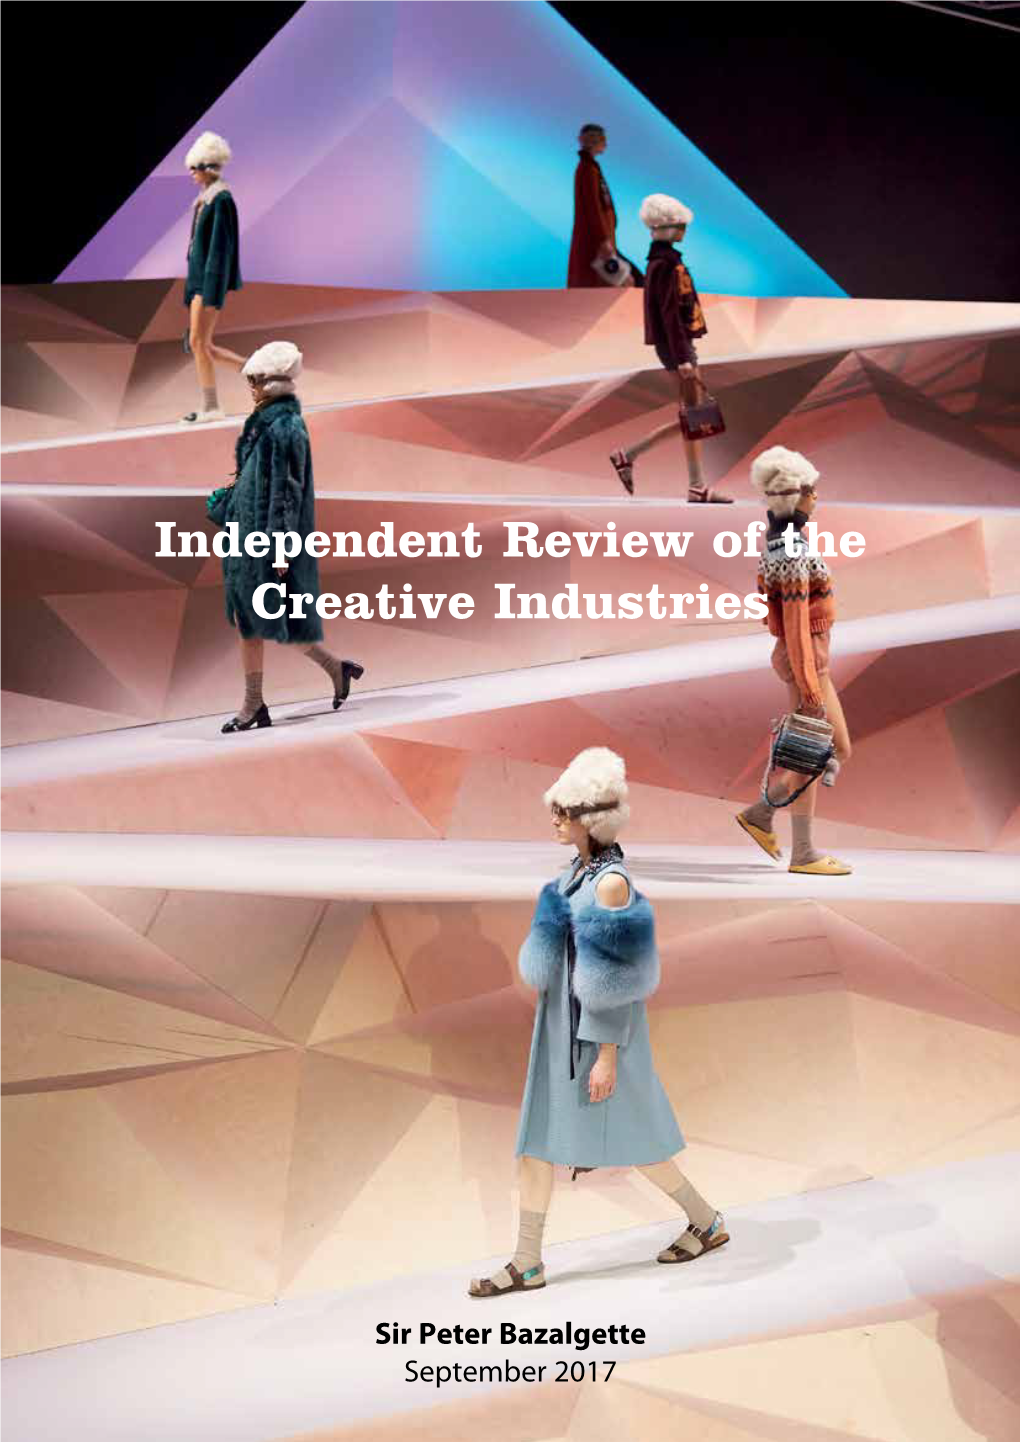 Independent Review of the Creative Industries